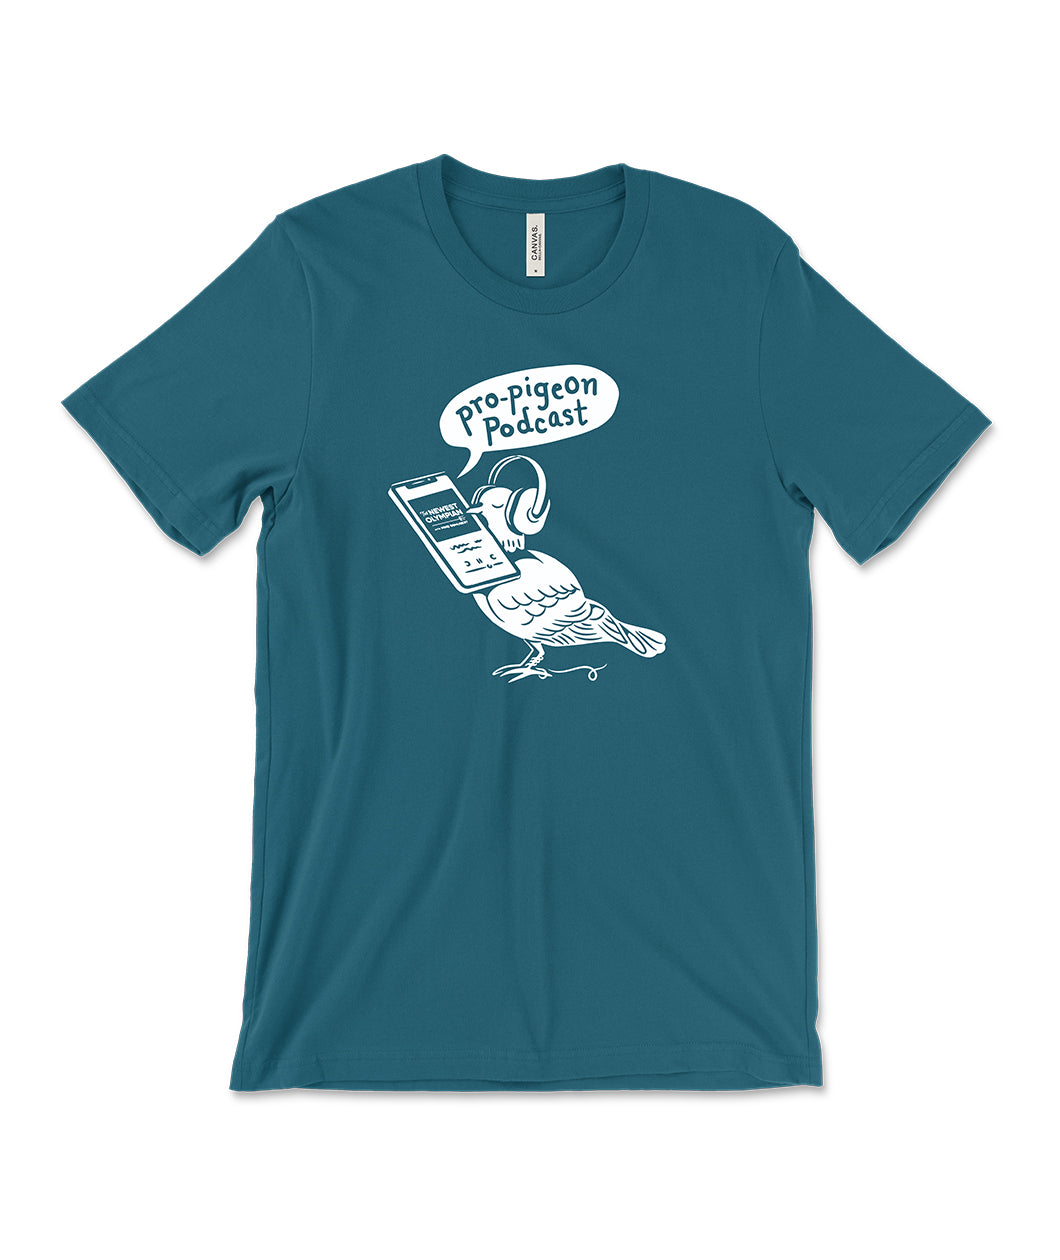 A dark teal t-shirt with a white, illustrated pigeon holding a phone in its mouth, waring headphones with a speech bubble that says 